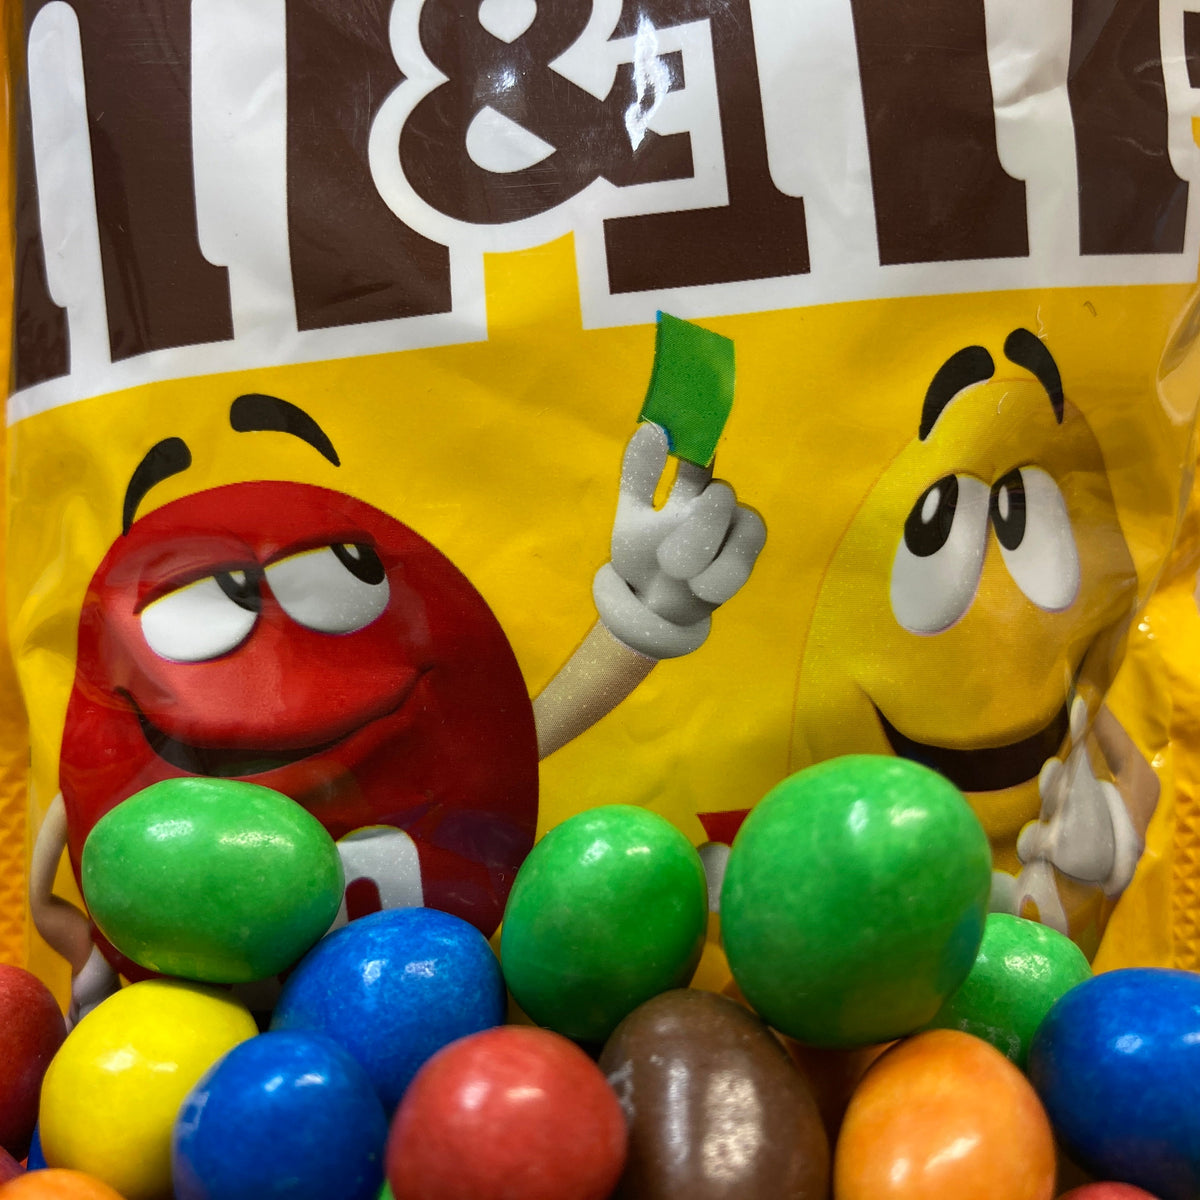 900g M&Ms Peanut (3 Bags of 300g) M&M's Shop with confidence and experience  Exceptional Value